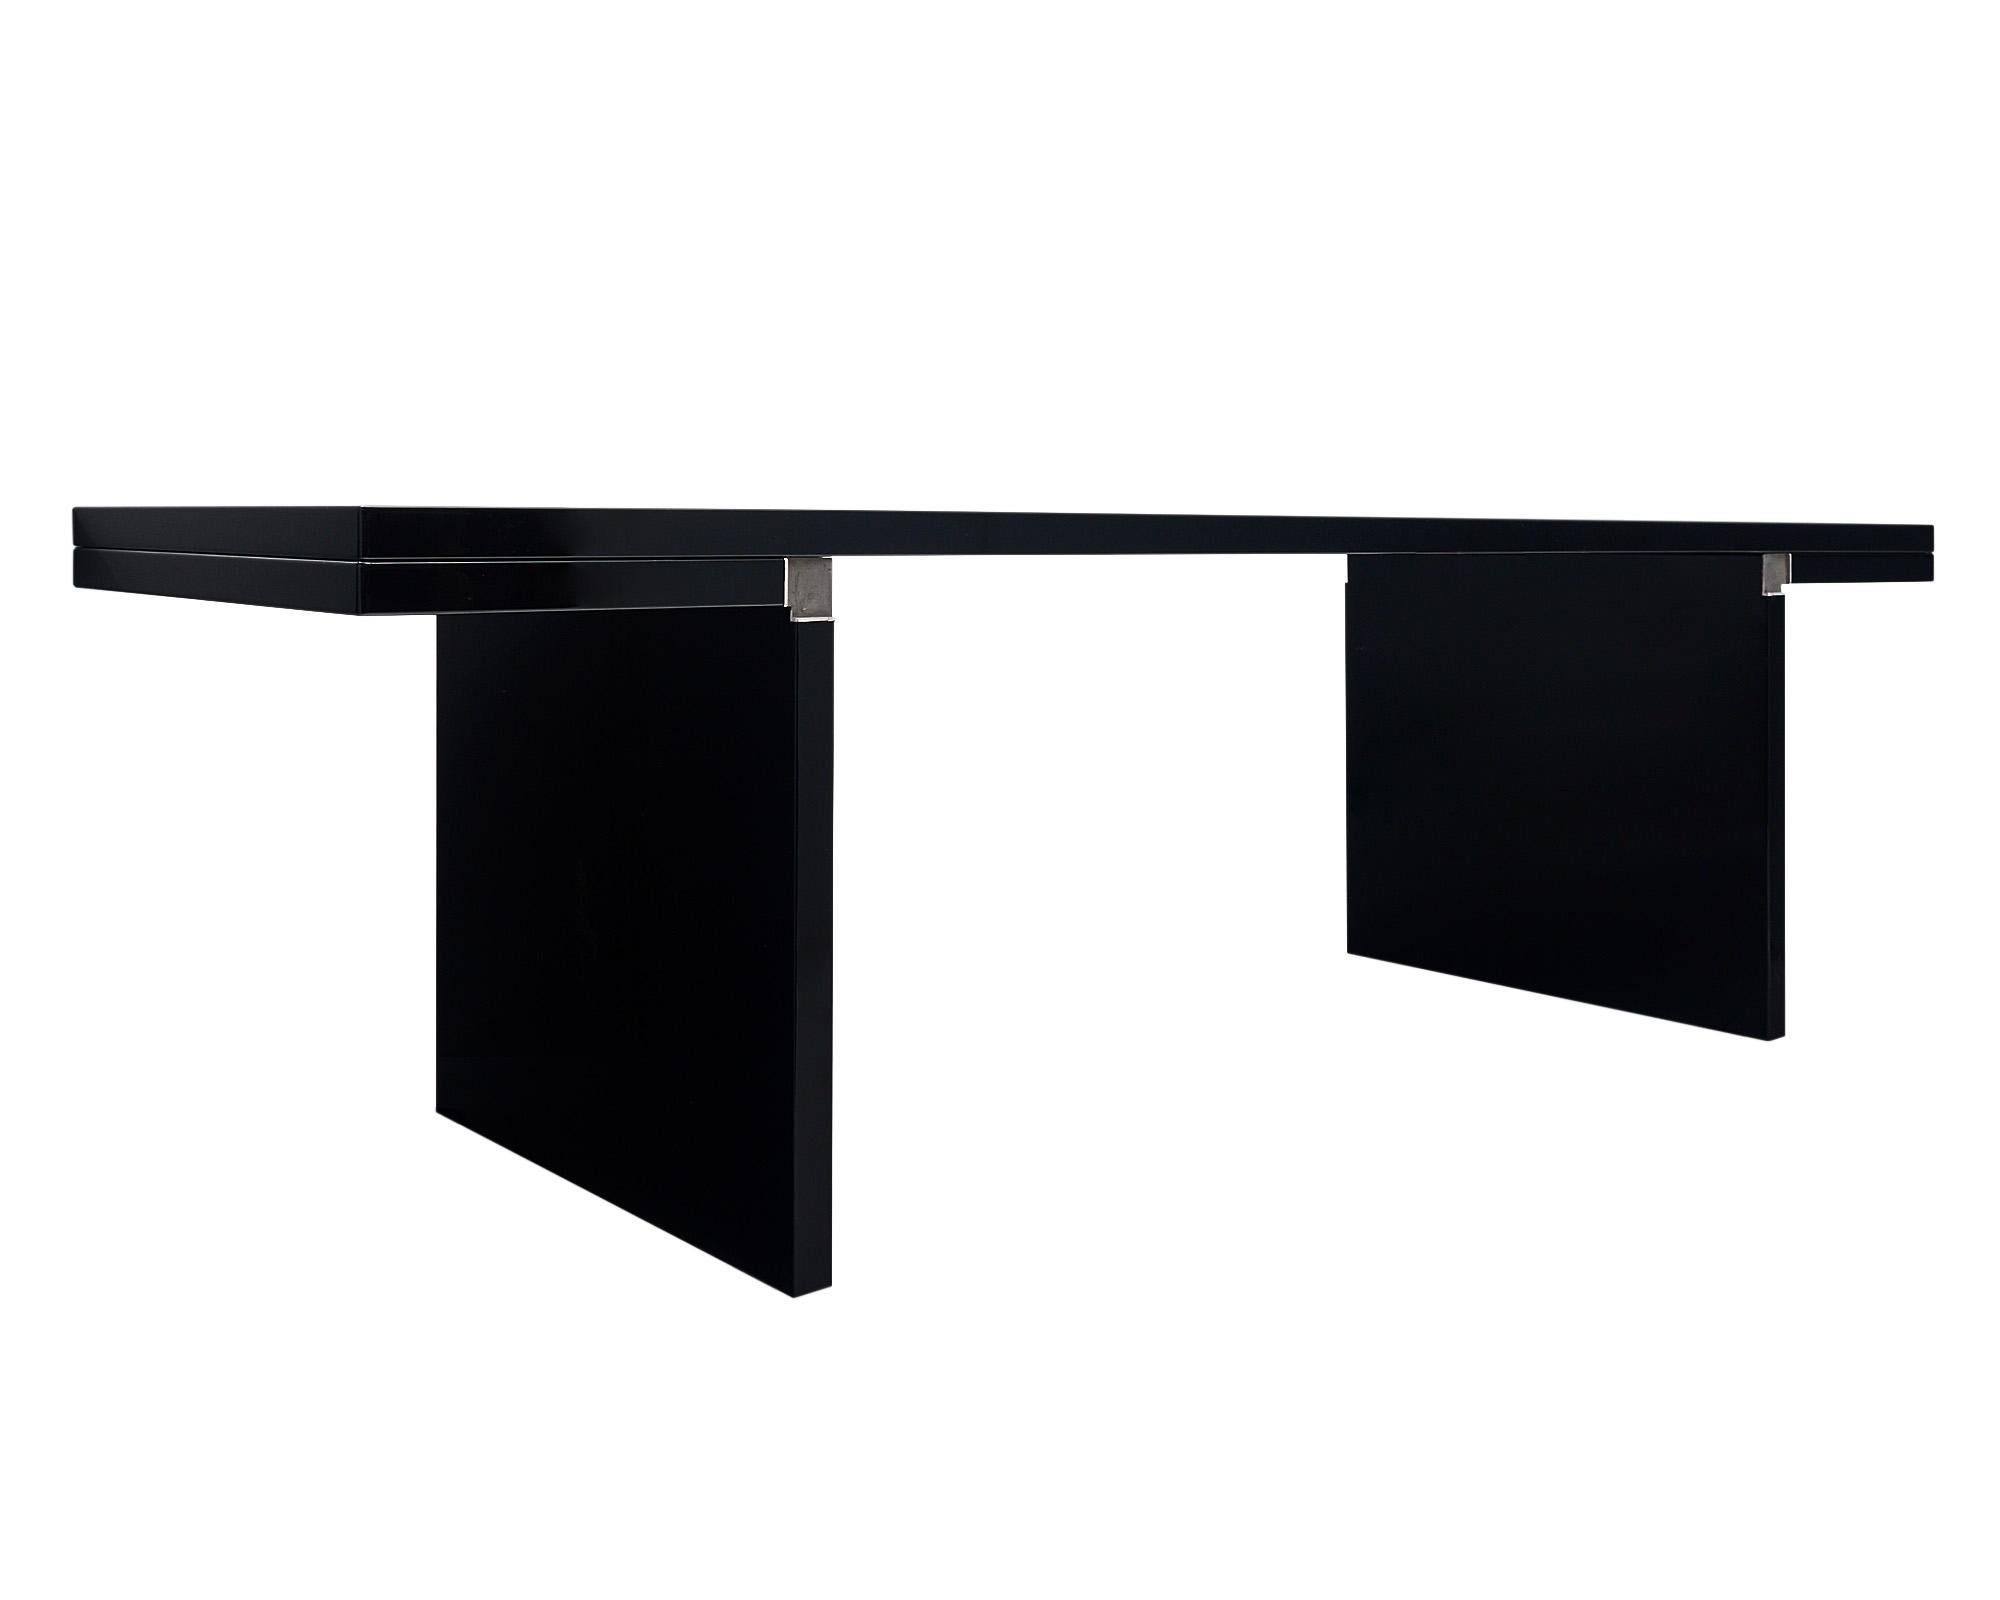 Italian lacquered table by Carlo Scarpa for Cassina. This piece is crafted with MDF panels that have been layered with very shiny mirror-like lacquer. The pieces are assembled using aluminum alloy joints. Carlo Scarpa’s designs are often notable for